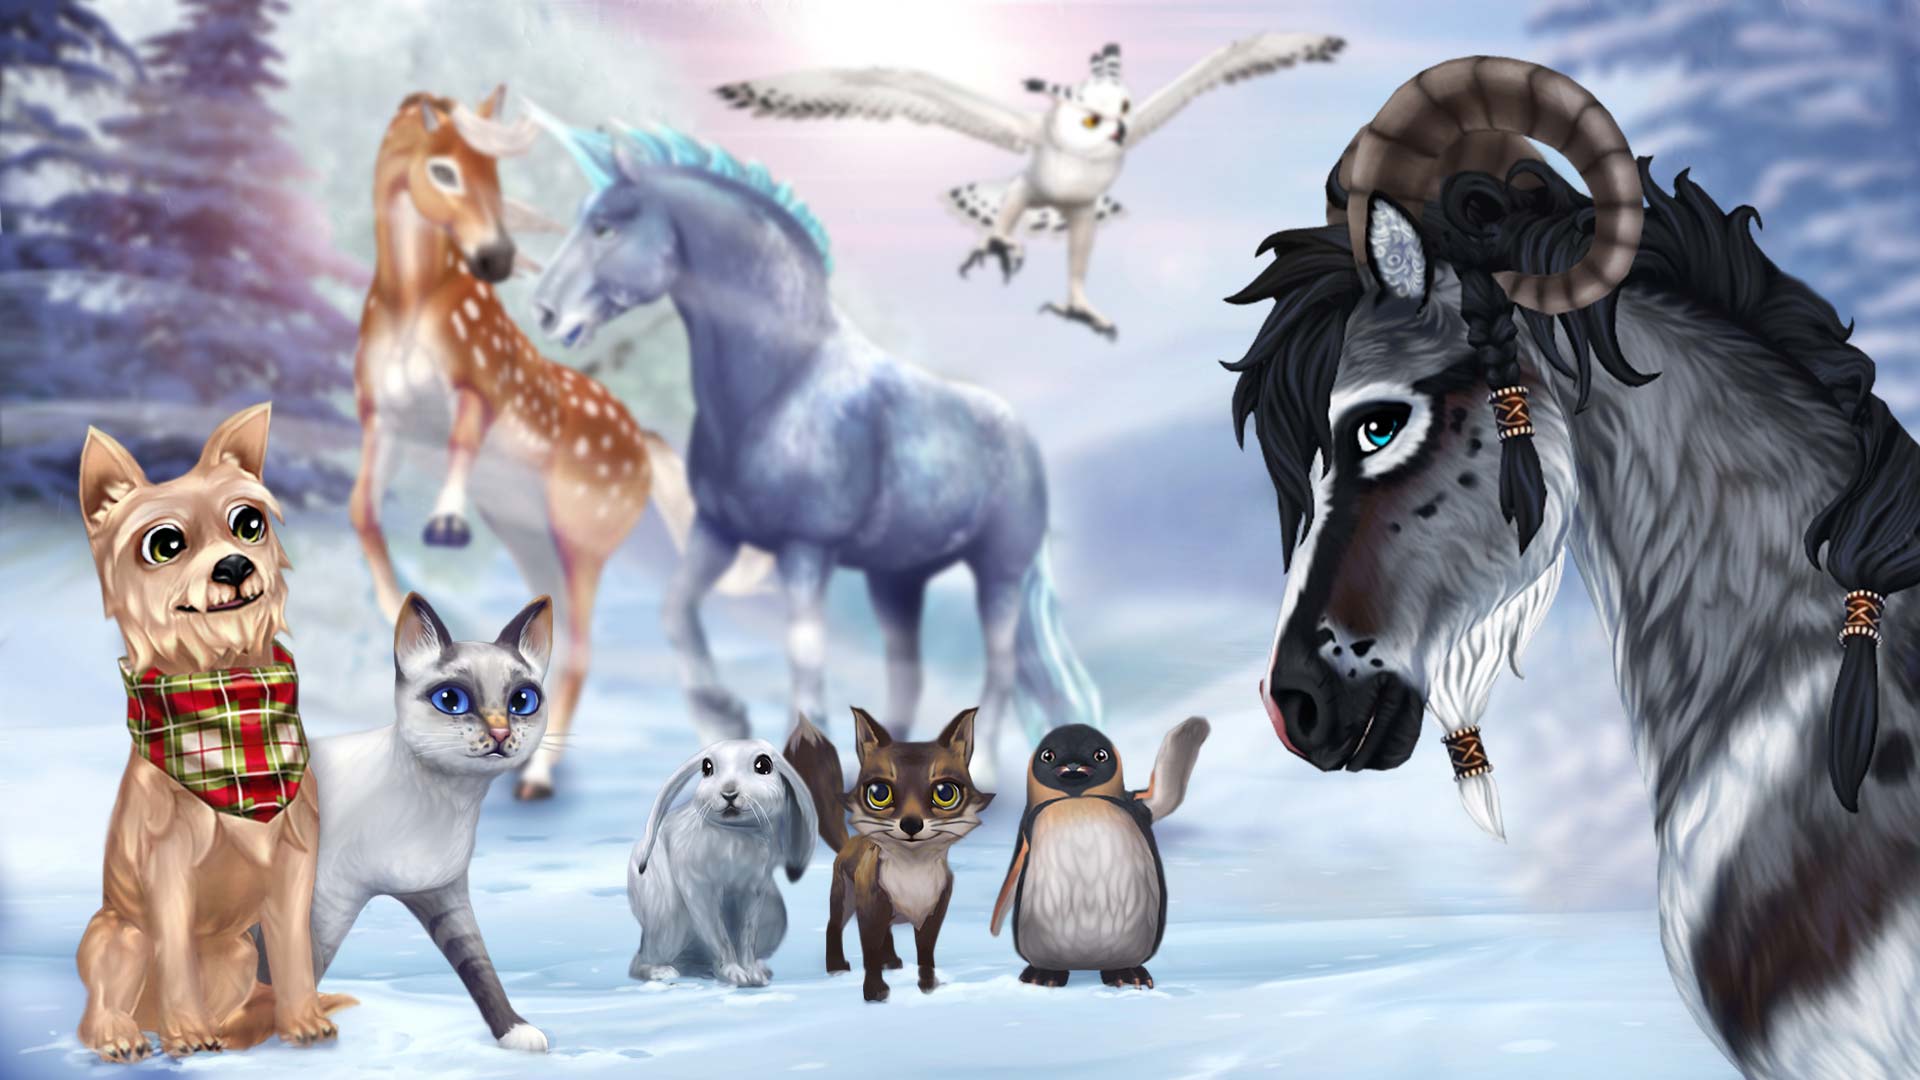 Previous pets and magical horses, winter 2022